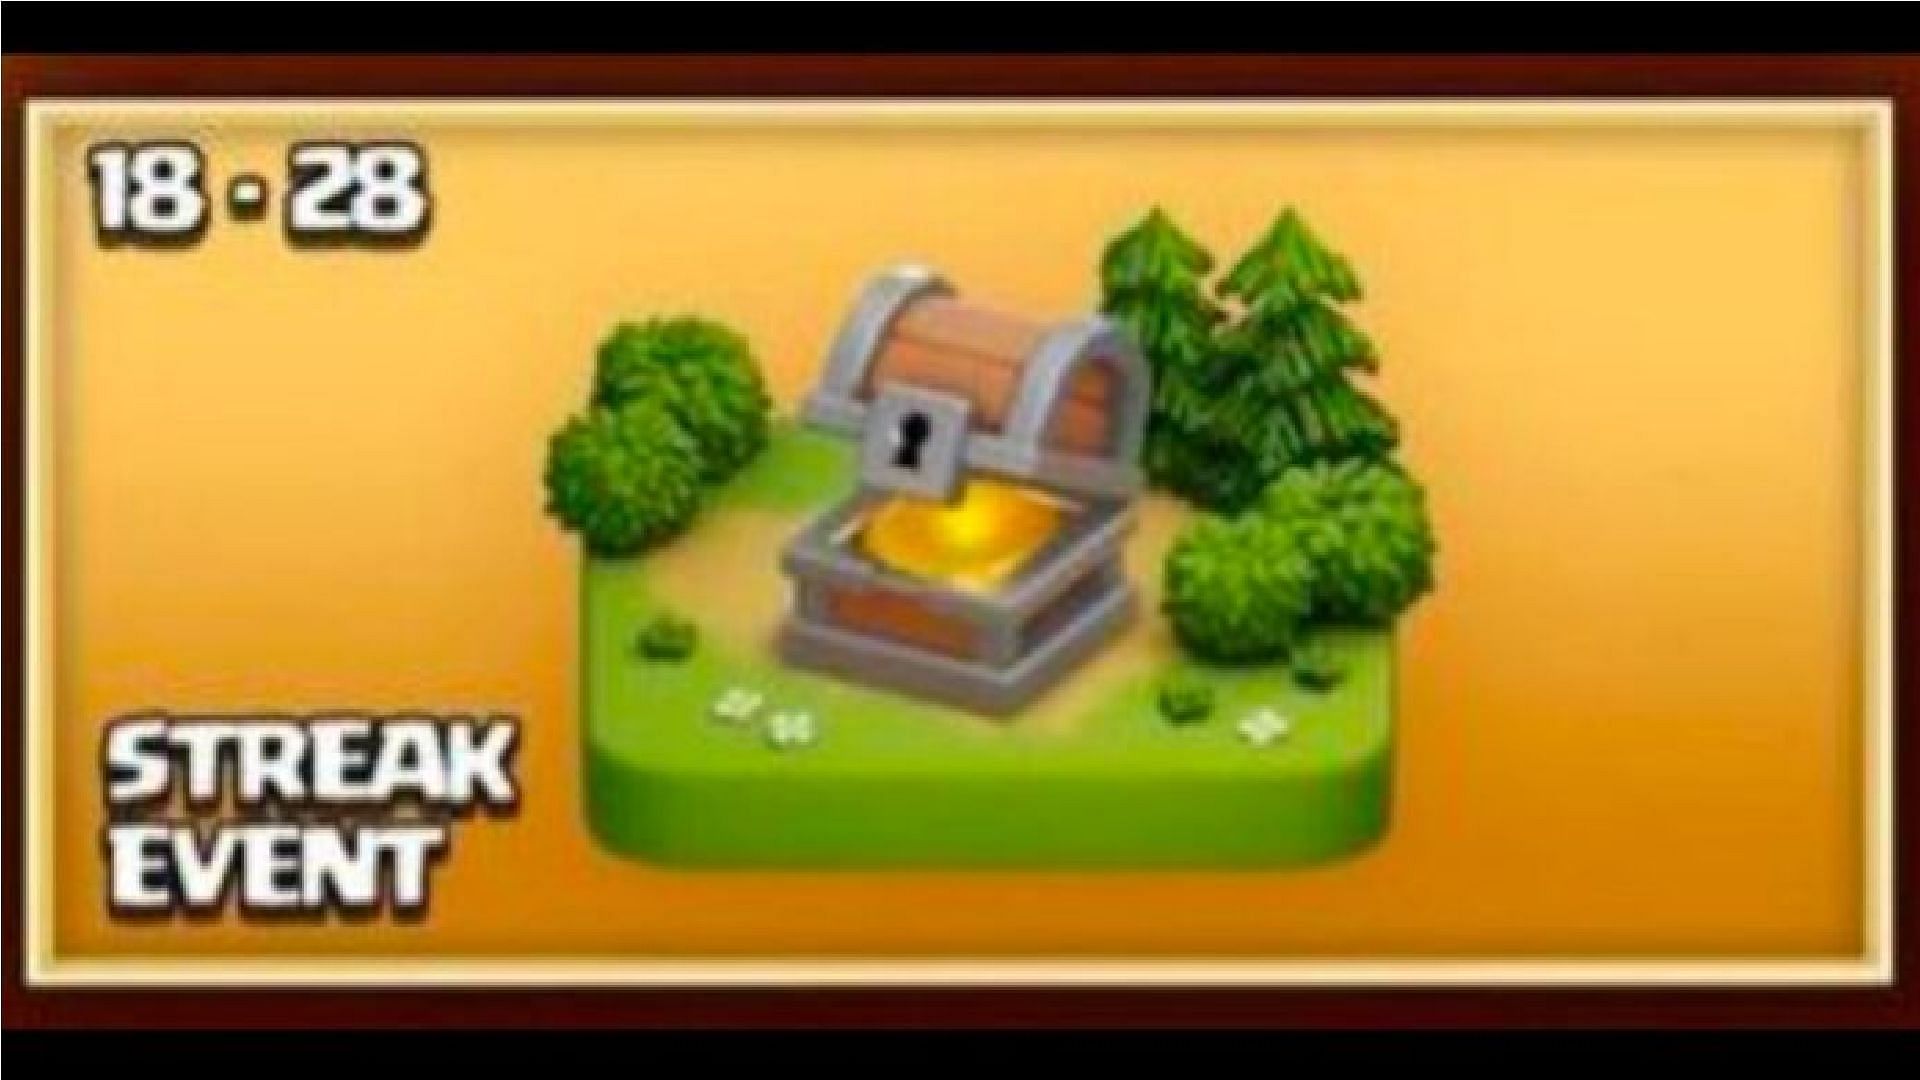 The new Streak Event this season will bring plenty of rewards for you (Image via Supercell)